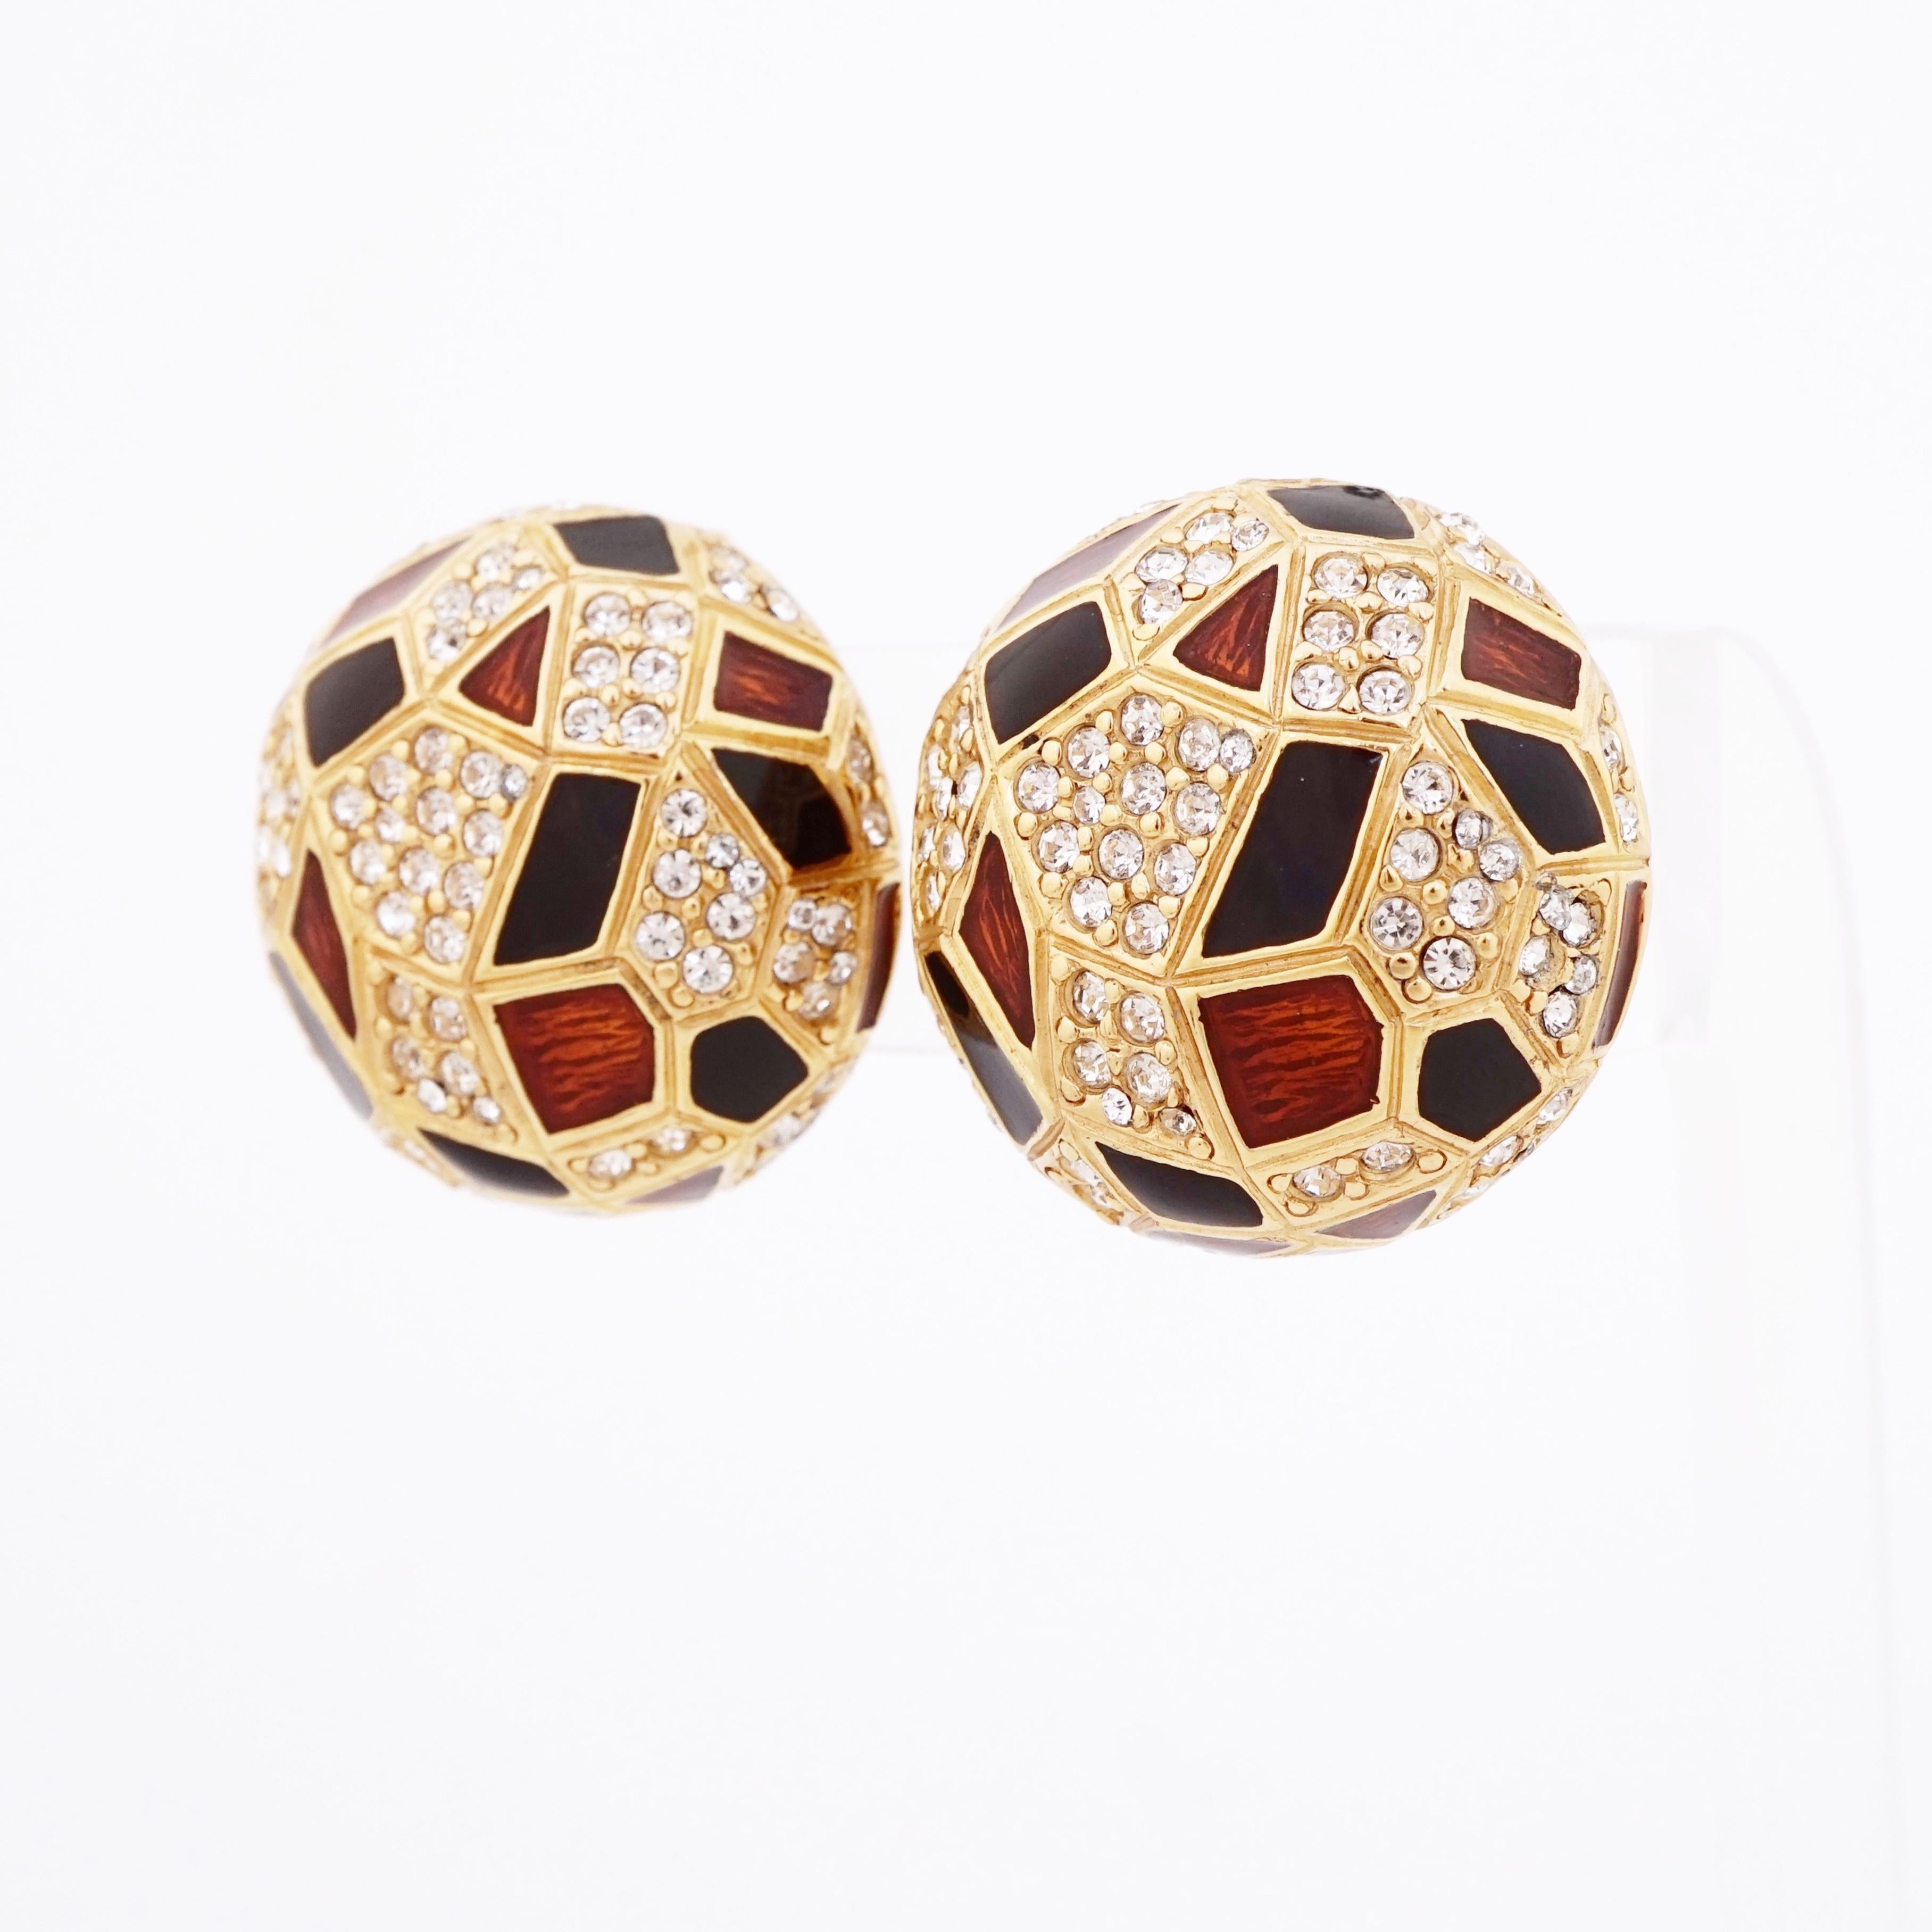 Modern Geometric Enameled Dome Earrings With Crystal Pavé By Ciner, 1980s For Sale